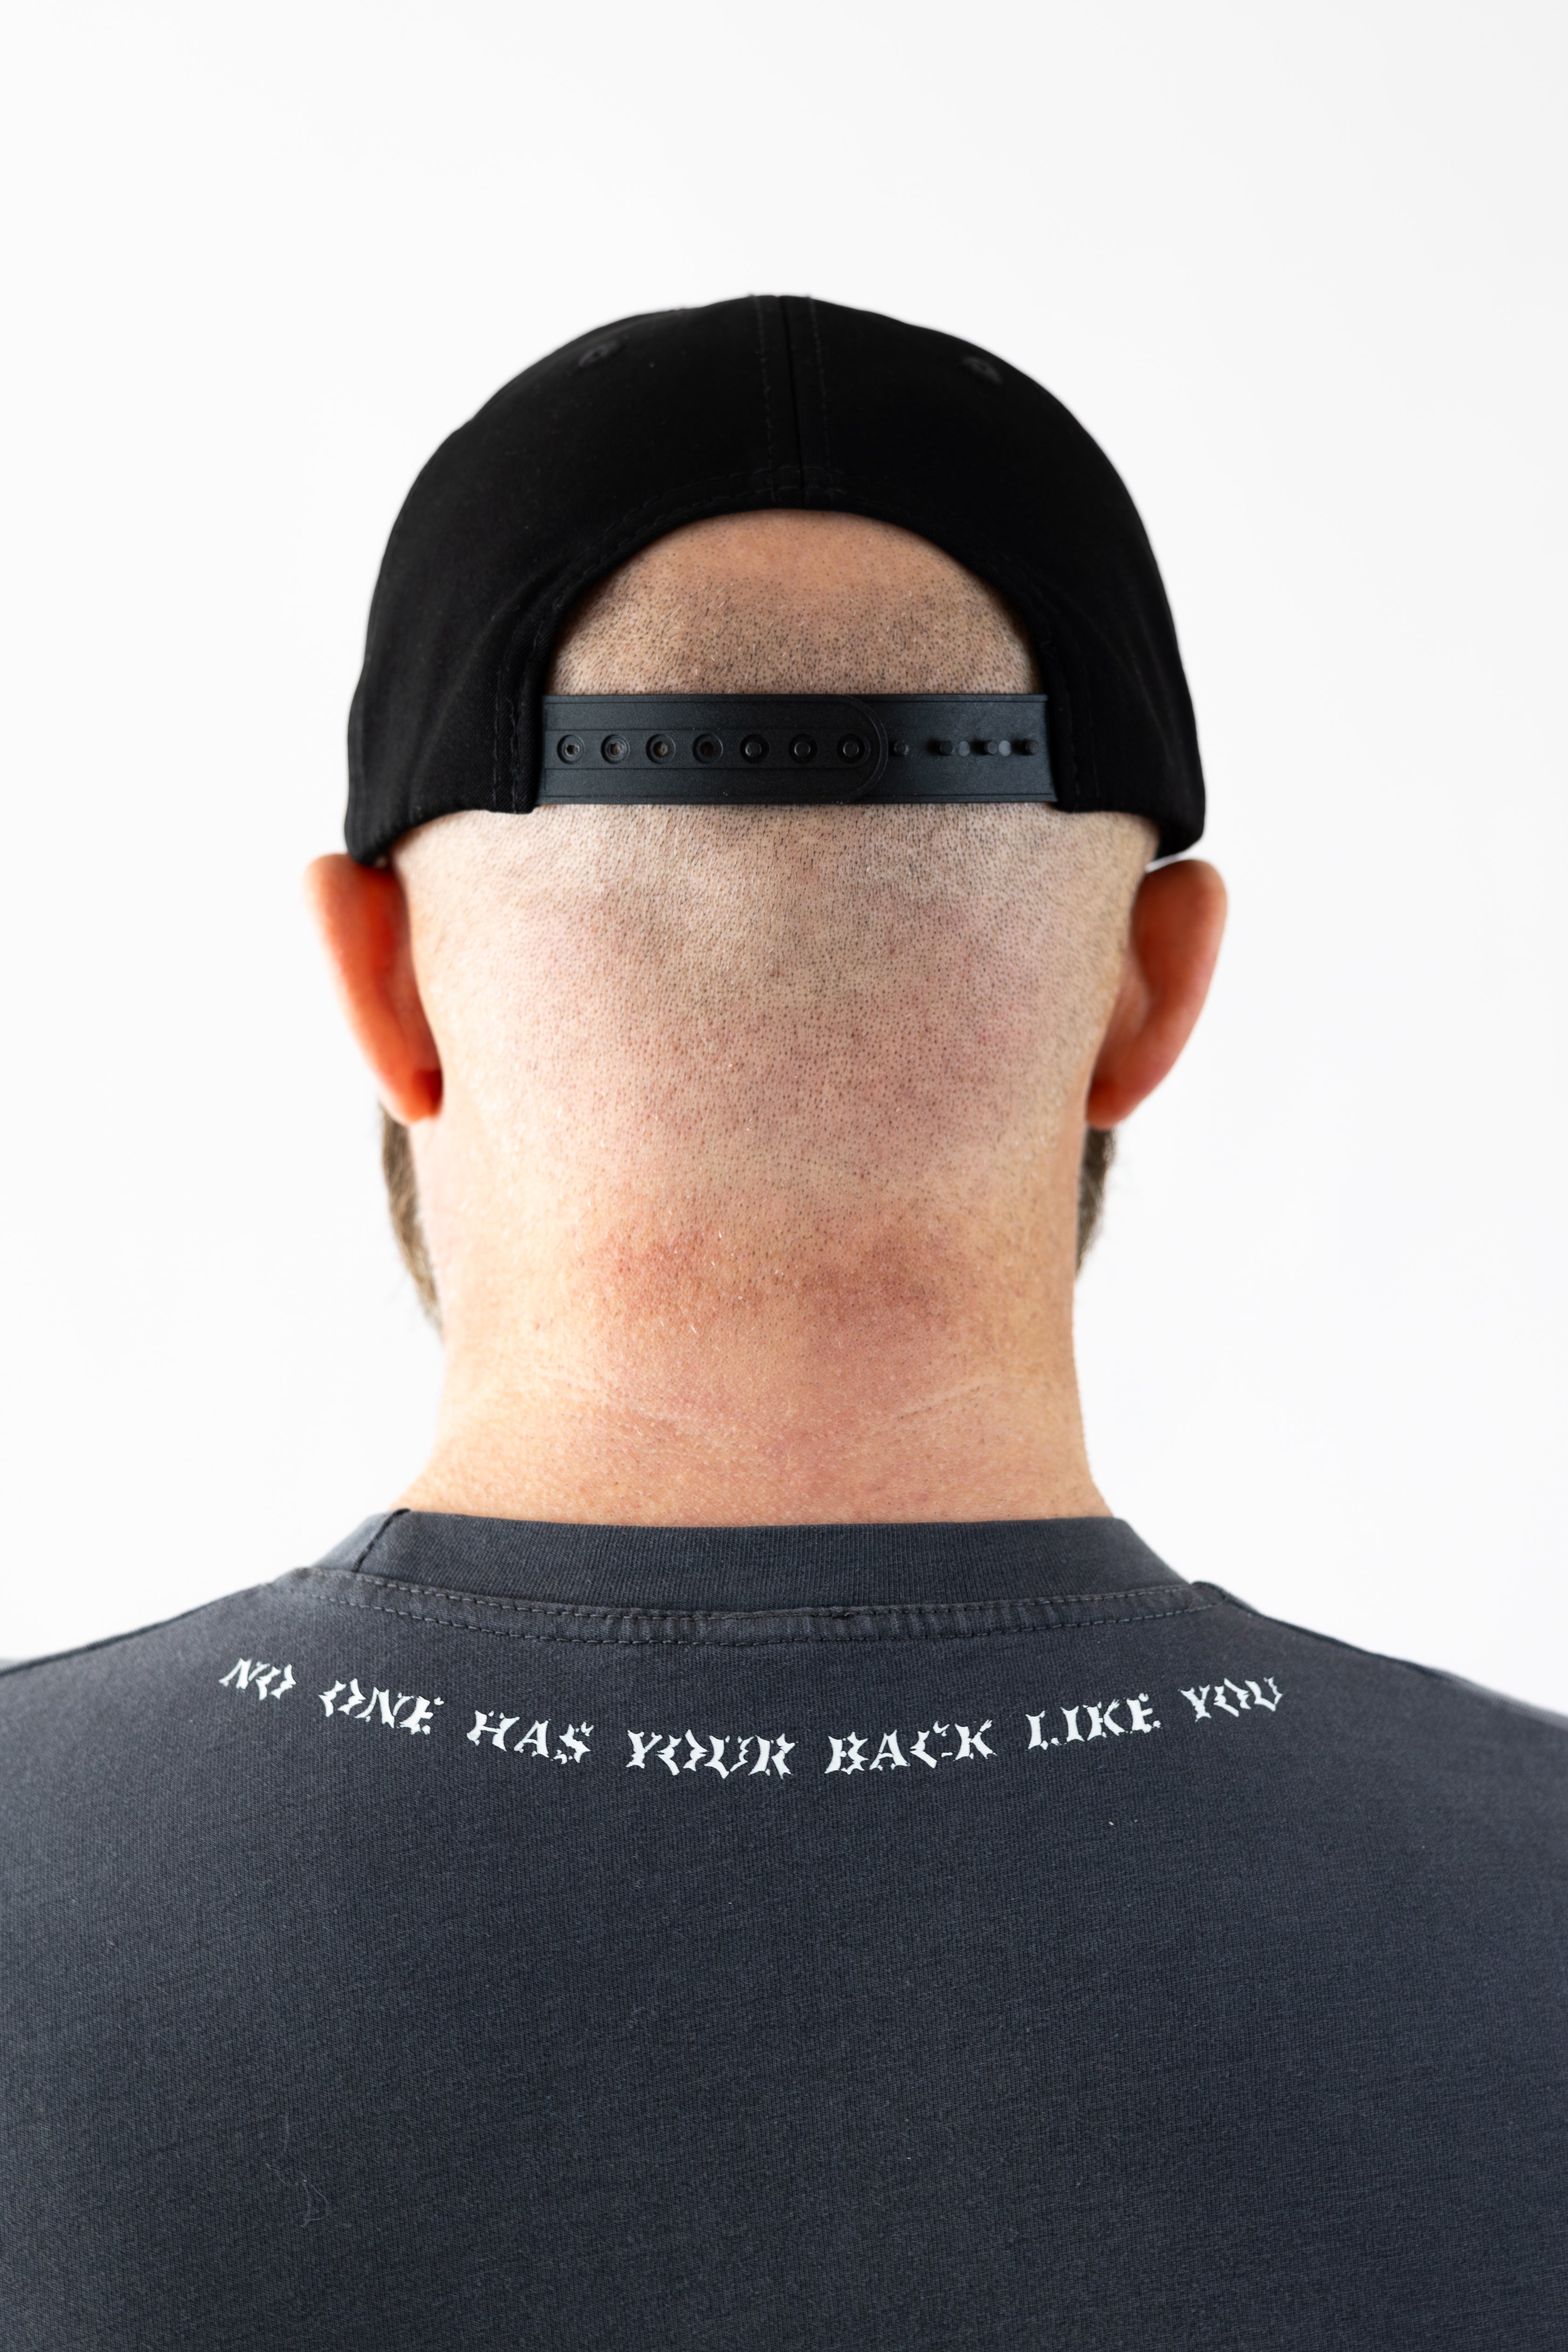 Rear view of a person wearing a black Strength of One cap and a t-shirt with text "no one has your back like you".